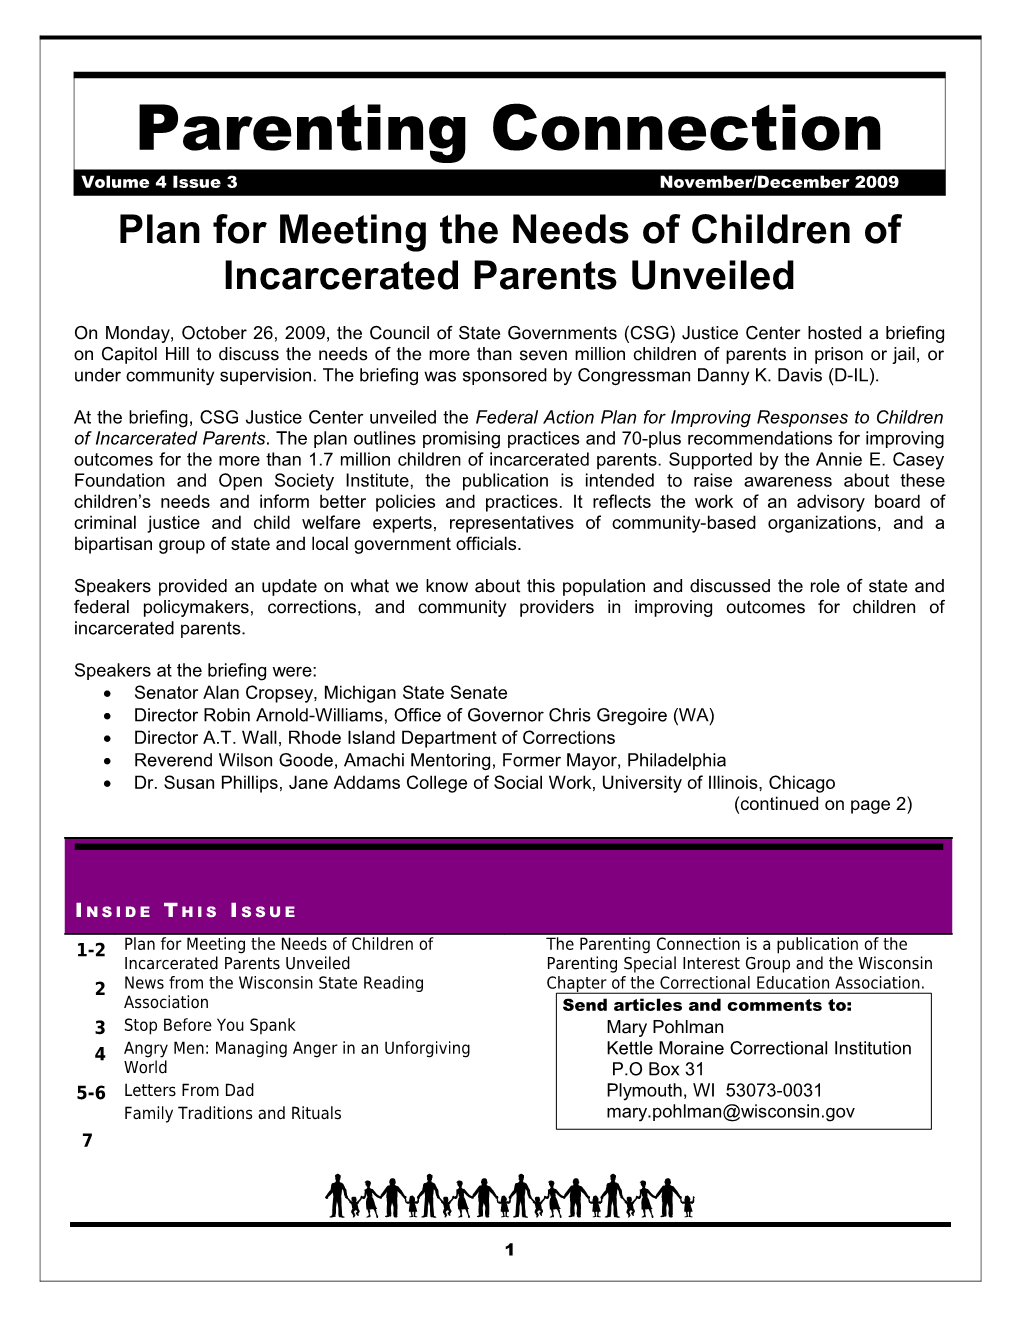 Plan for Meeting the Needs of Children of Incarcerated Parents Unveiled